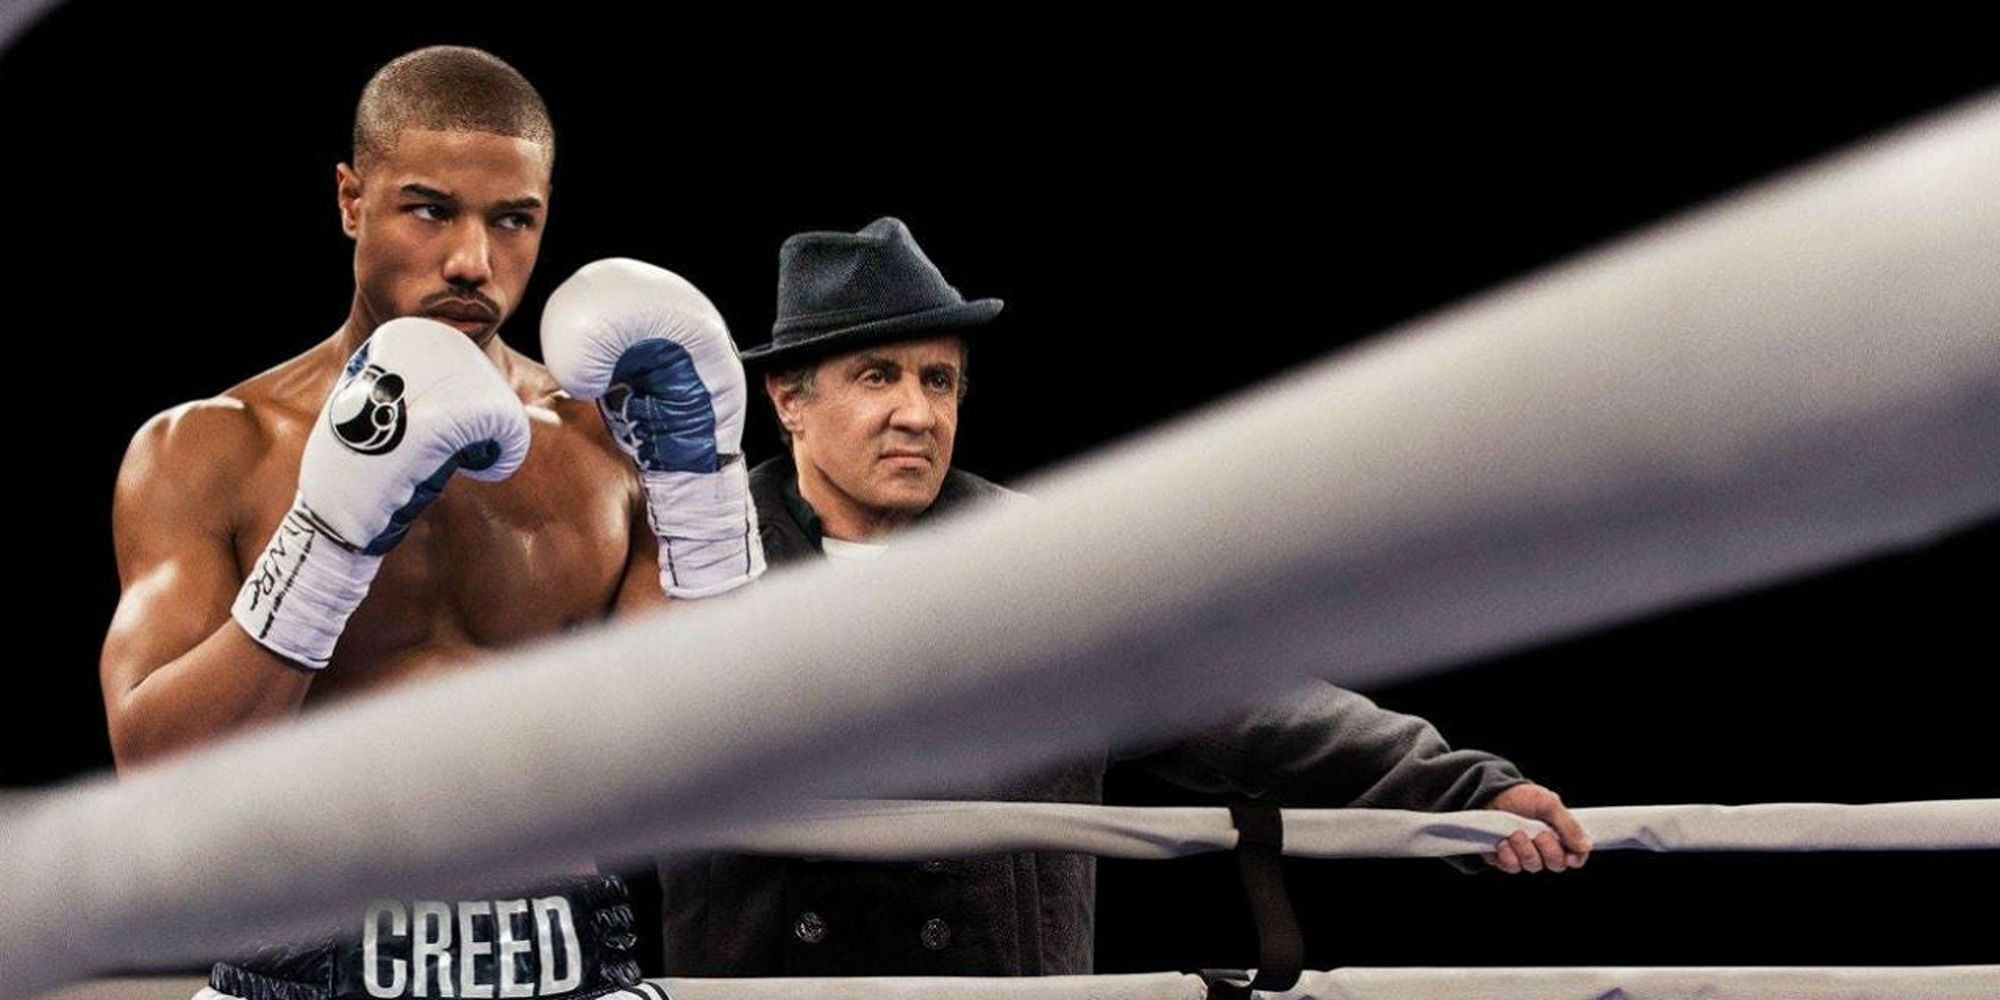 Michael B. Jordan in the ring, followed by Sylvester Stallone in Creed